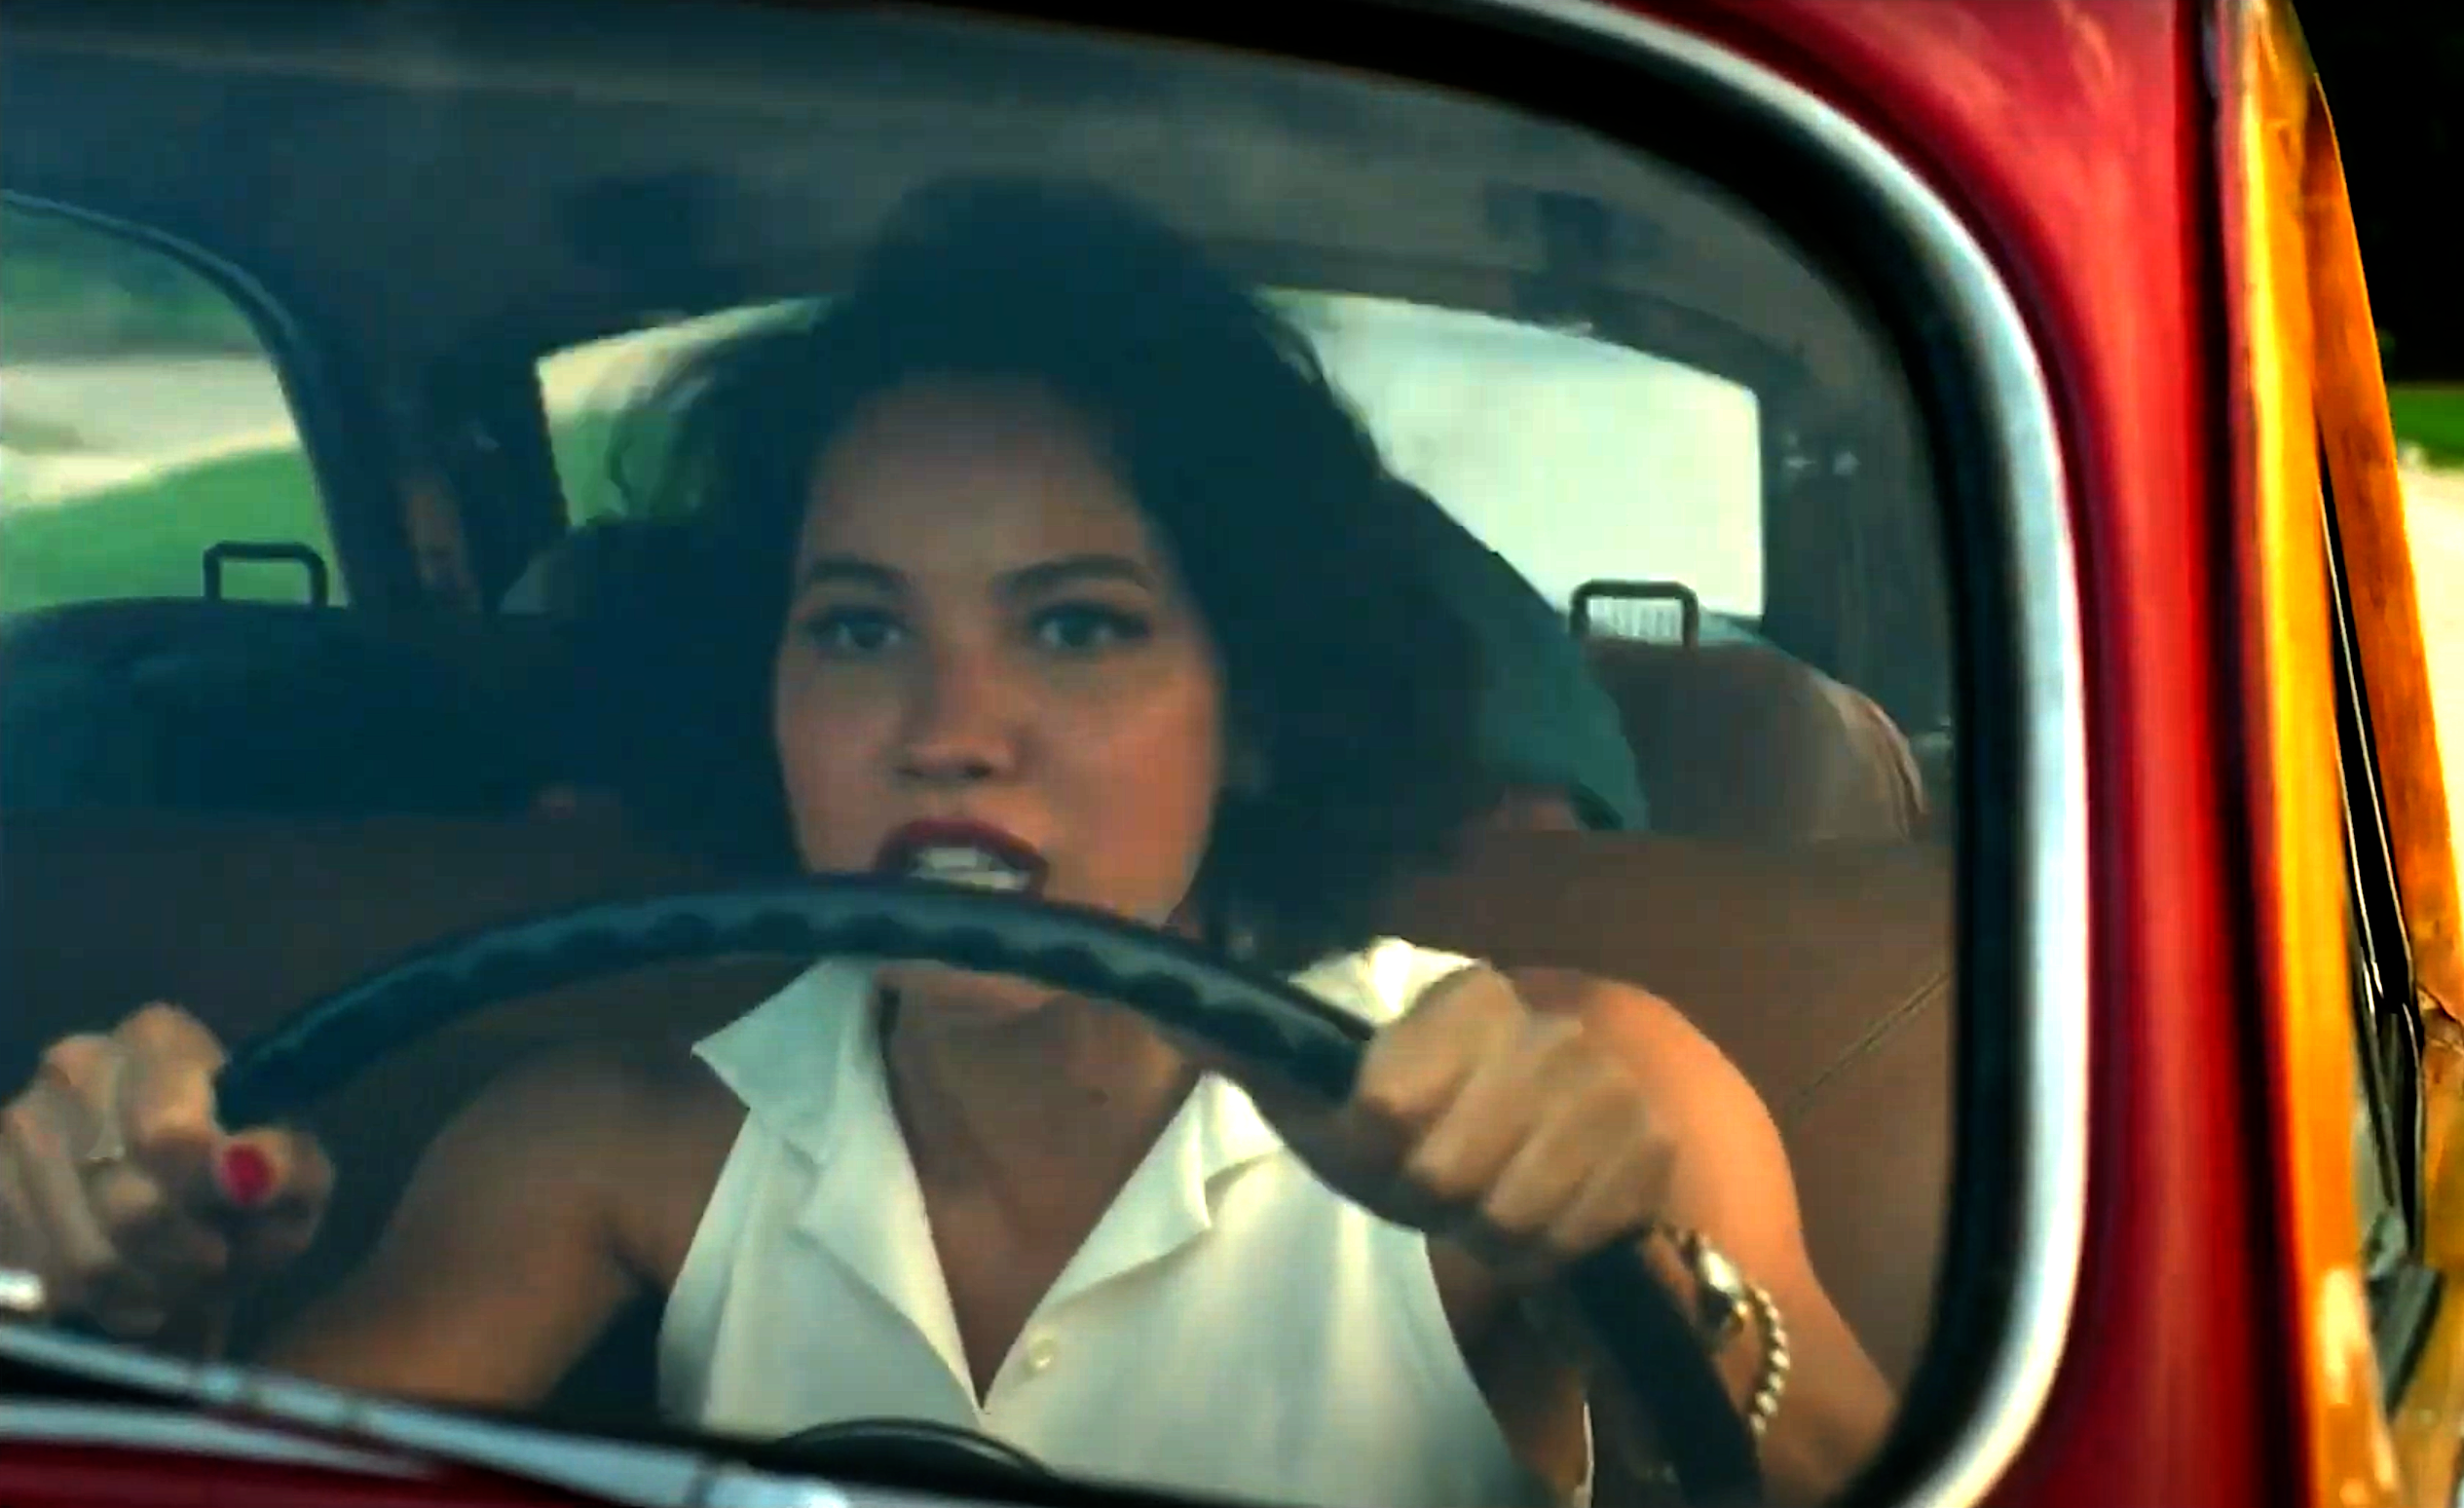 Jurnee Smollett looking very focused and tense, driving an old-fashioned car